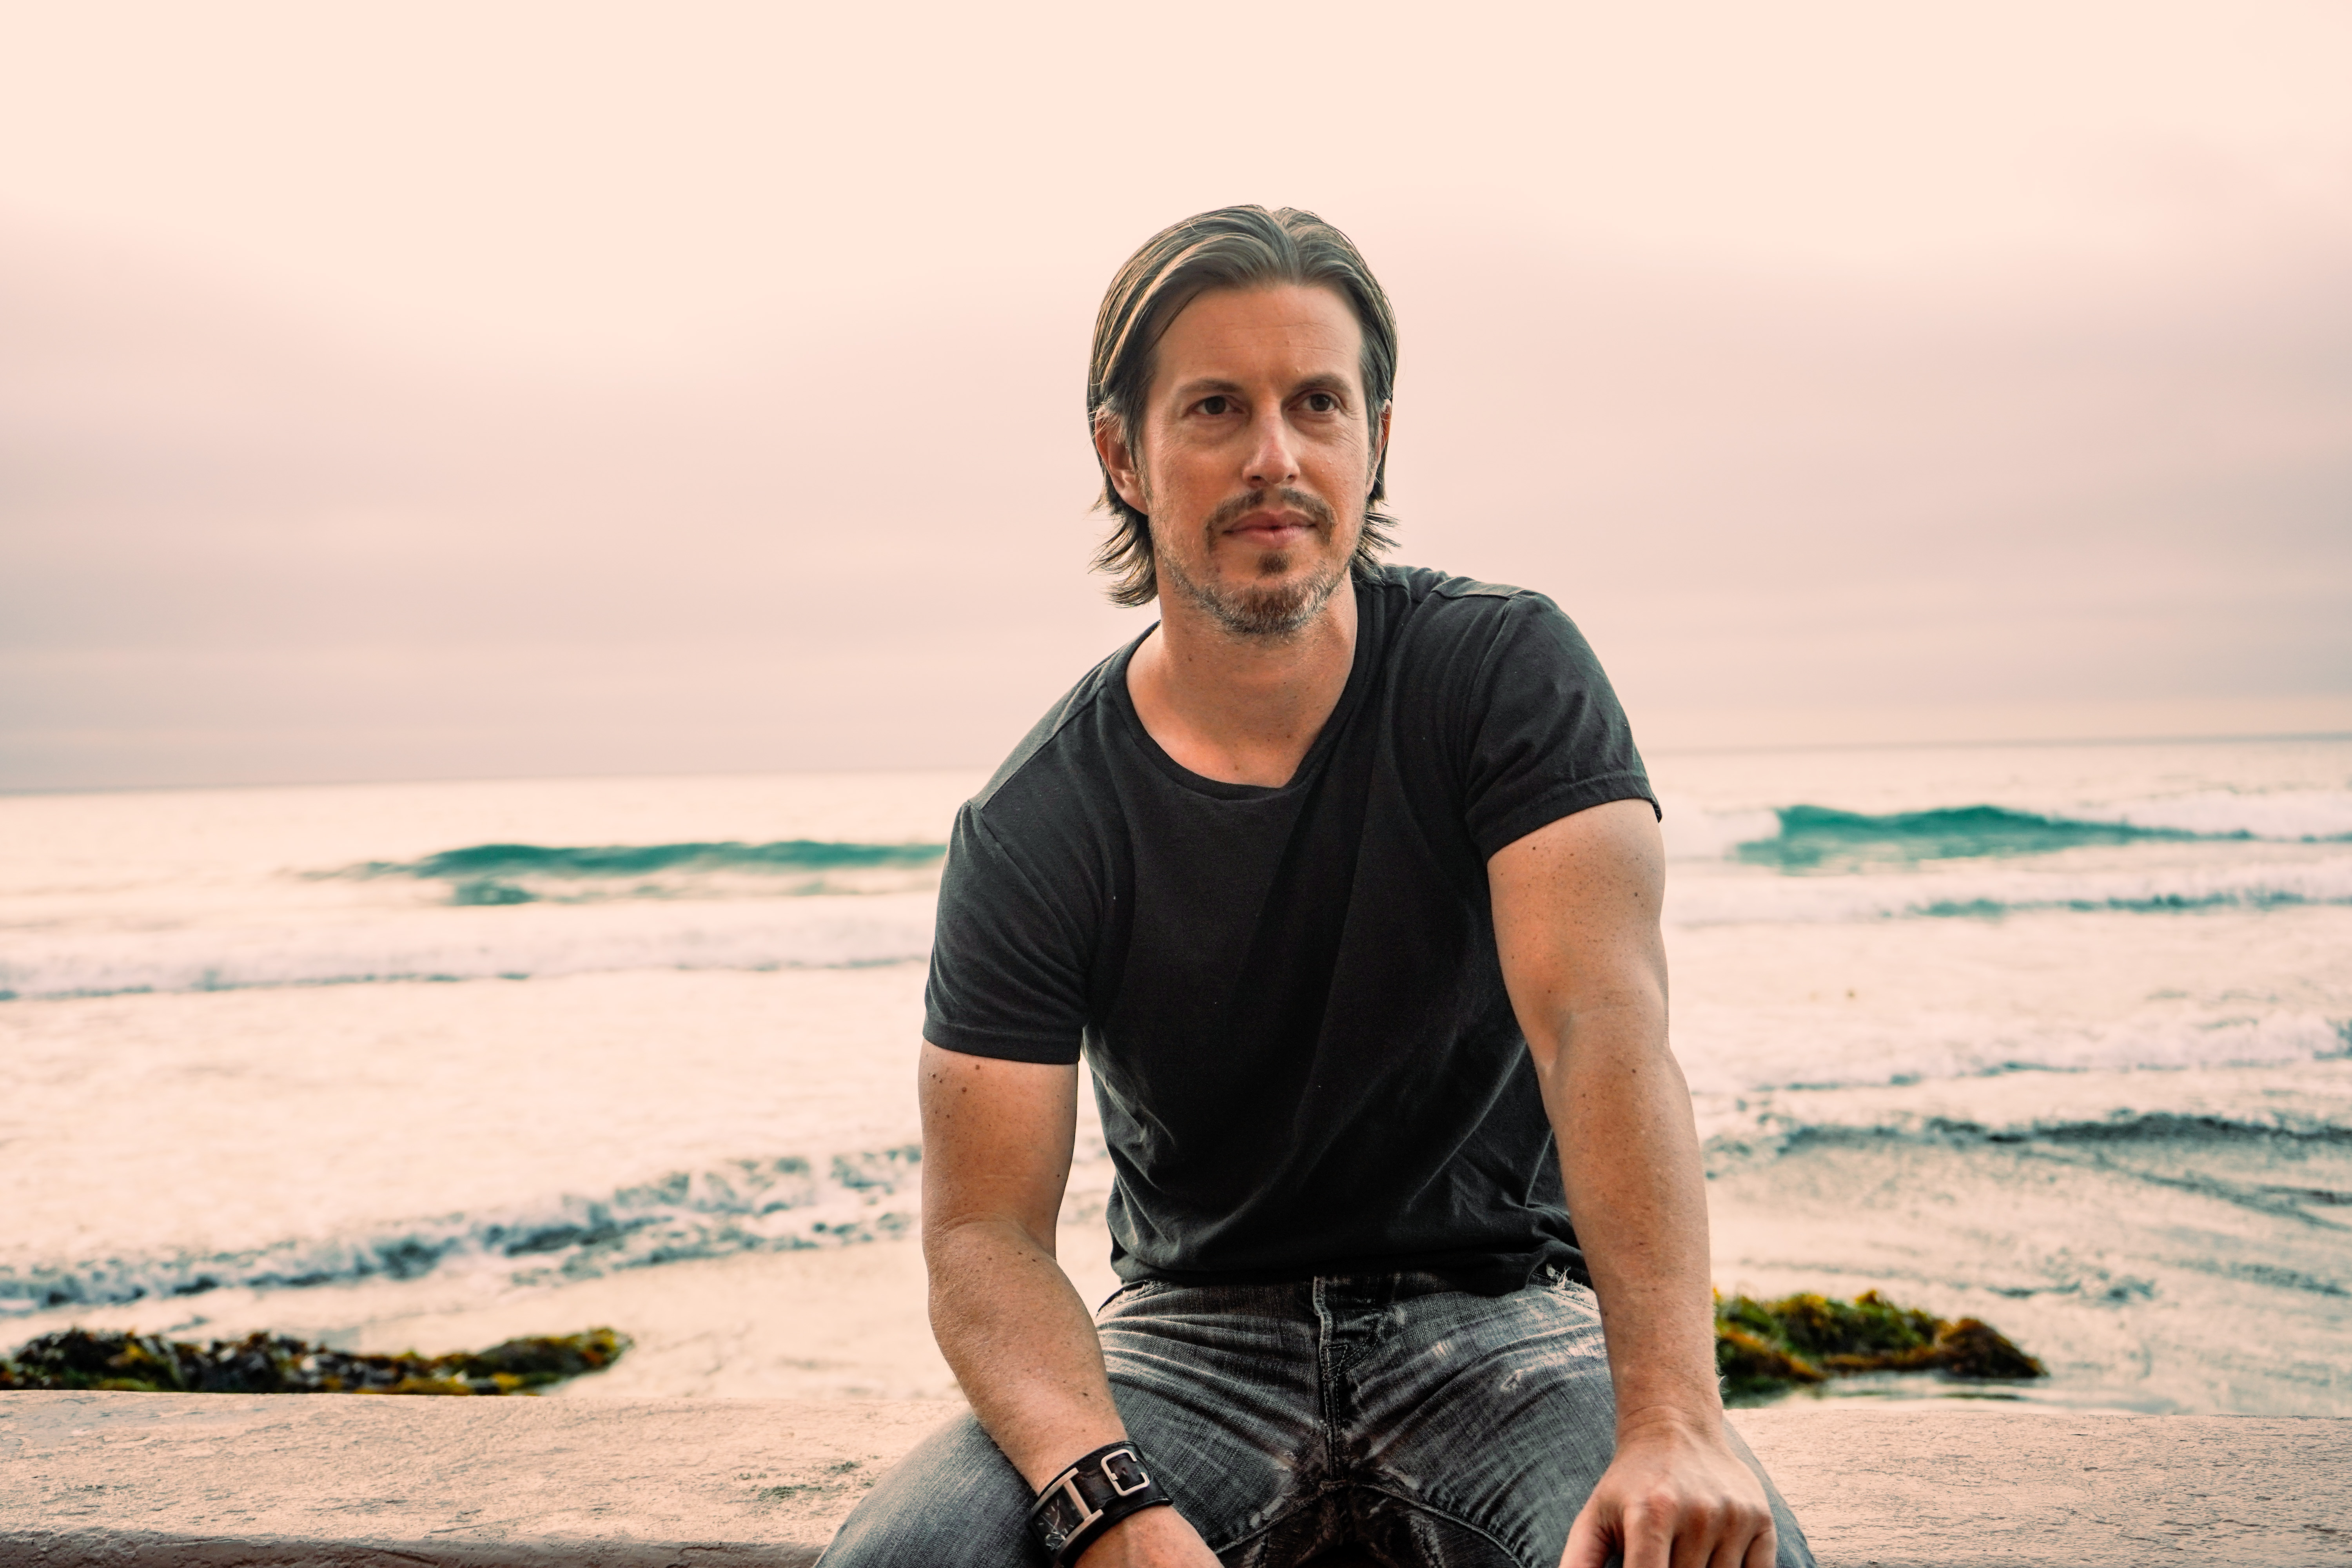 Wearing a black T-shirt and blue jeans, Barton Stanley David faces the camera, the ocean behind him